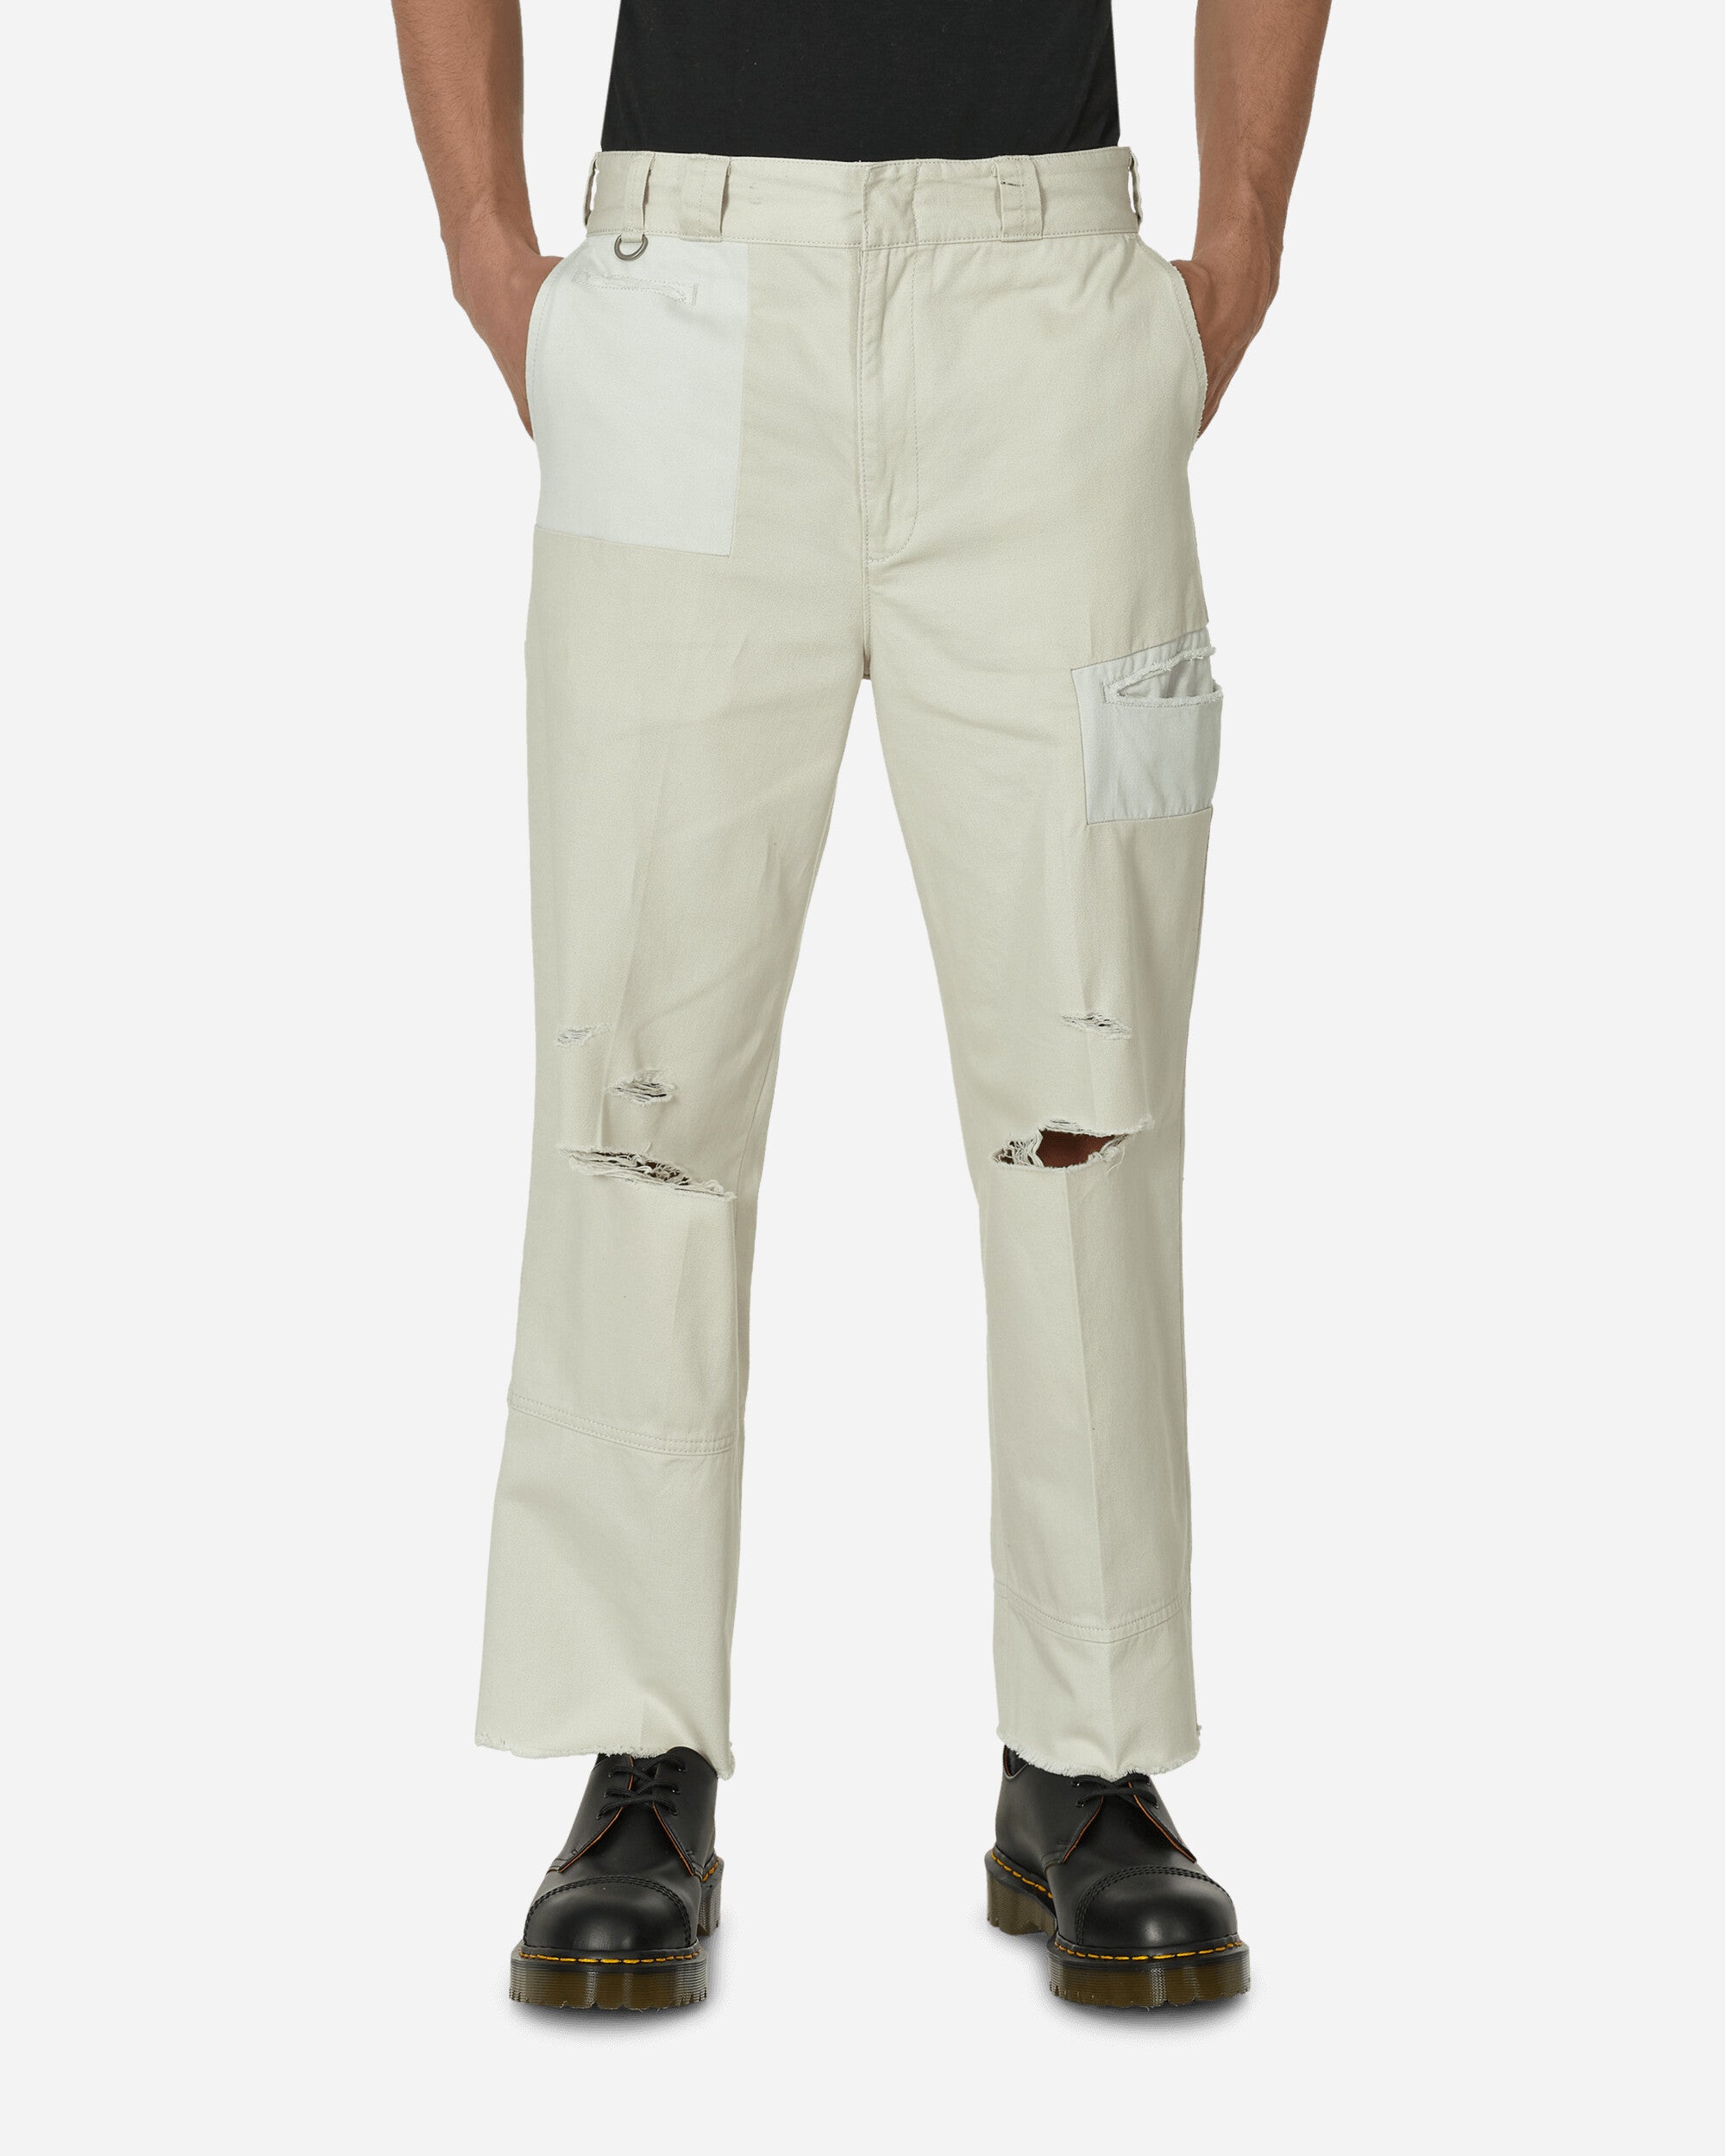 Undercover Workwear Pant Ice Grey Pants Trousers UC1C4511 001